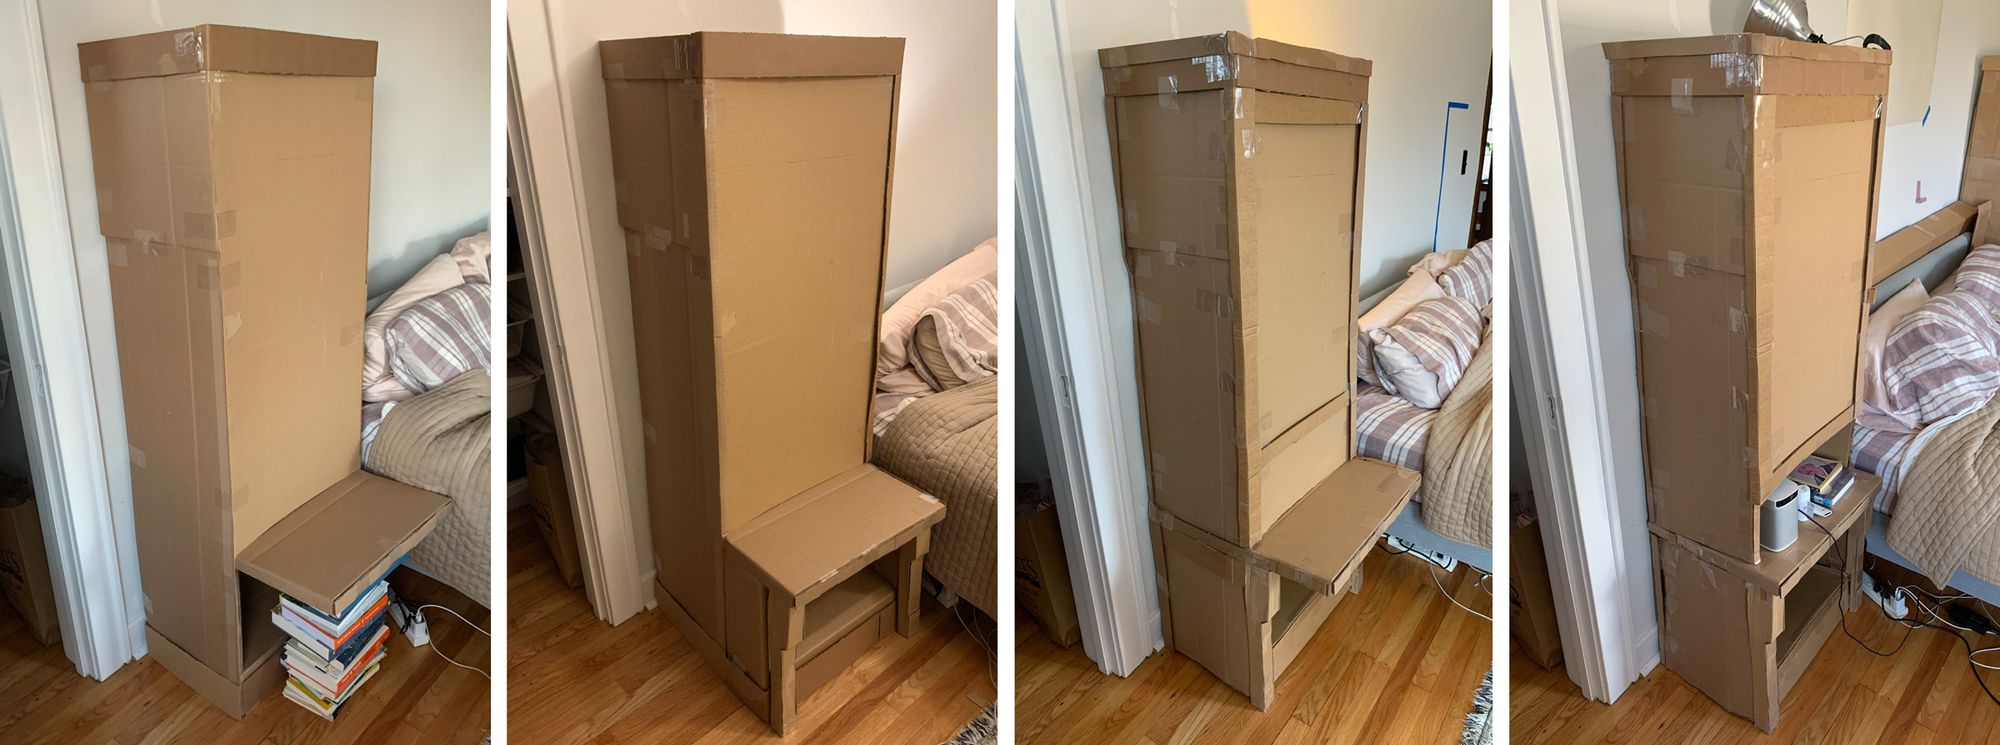 Evolution of cabinet design: with overhanging shelf, legs and side supporting overhang, reduced overhang, then cutout into cabinet with 2-3 inch overhang.